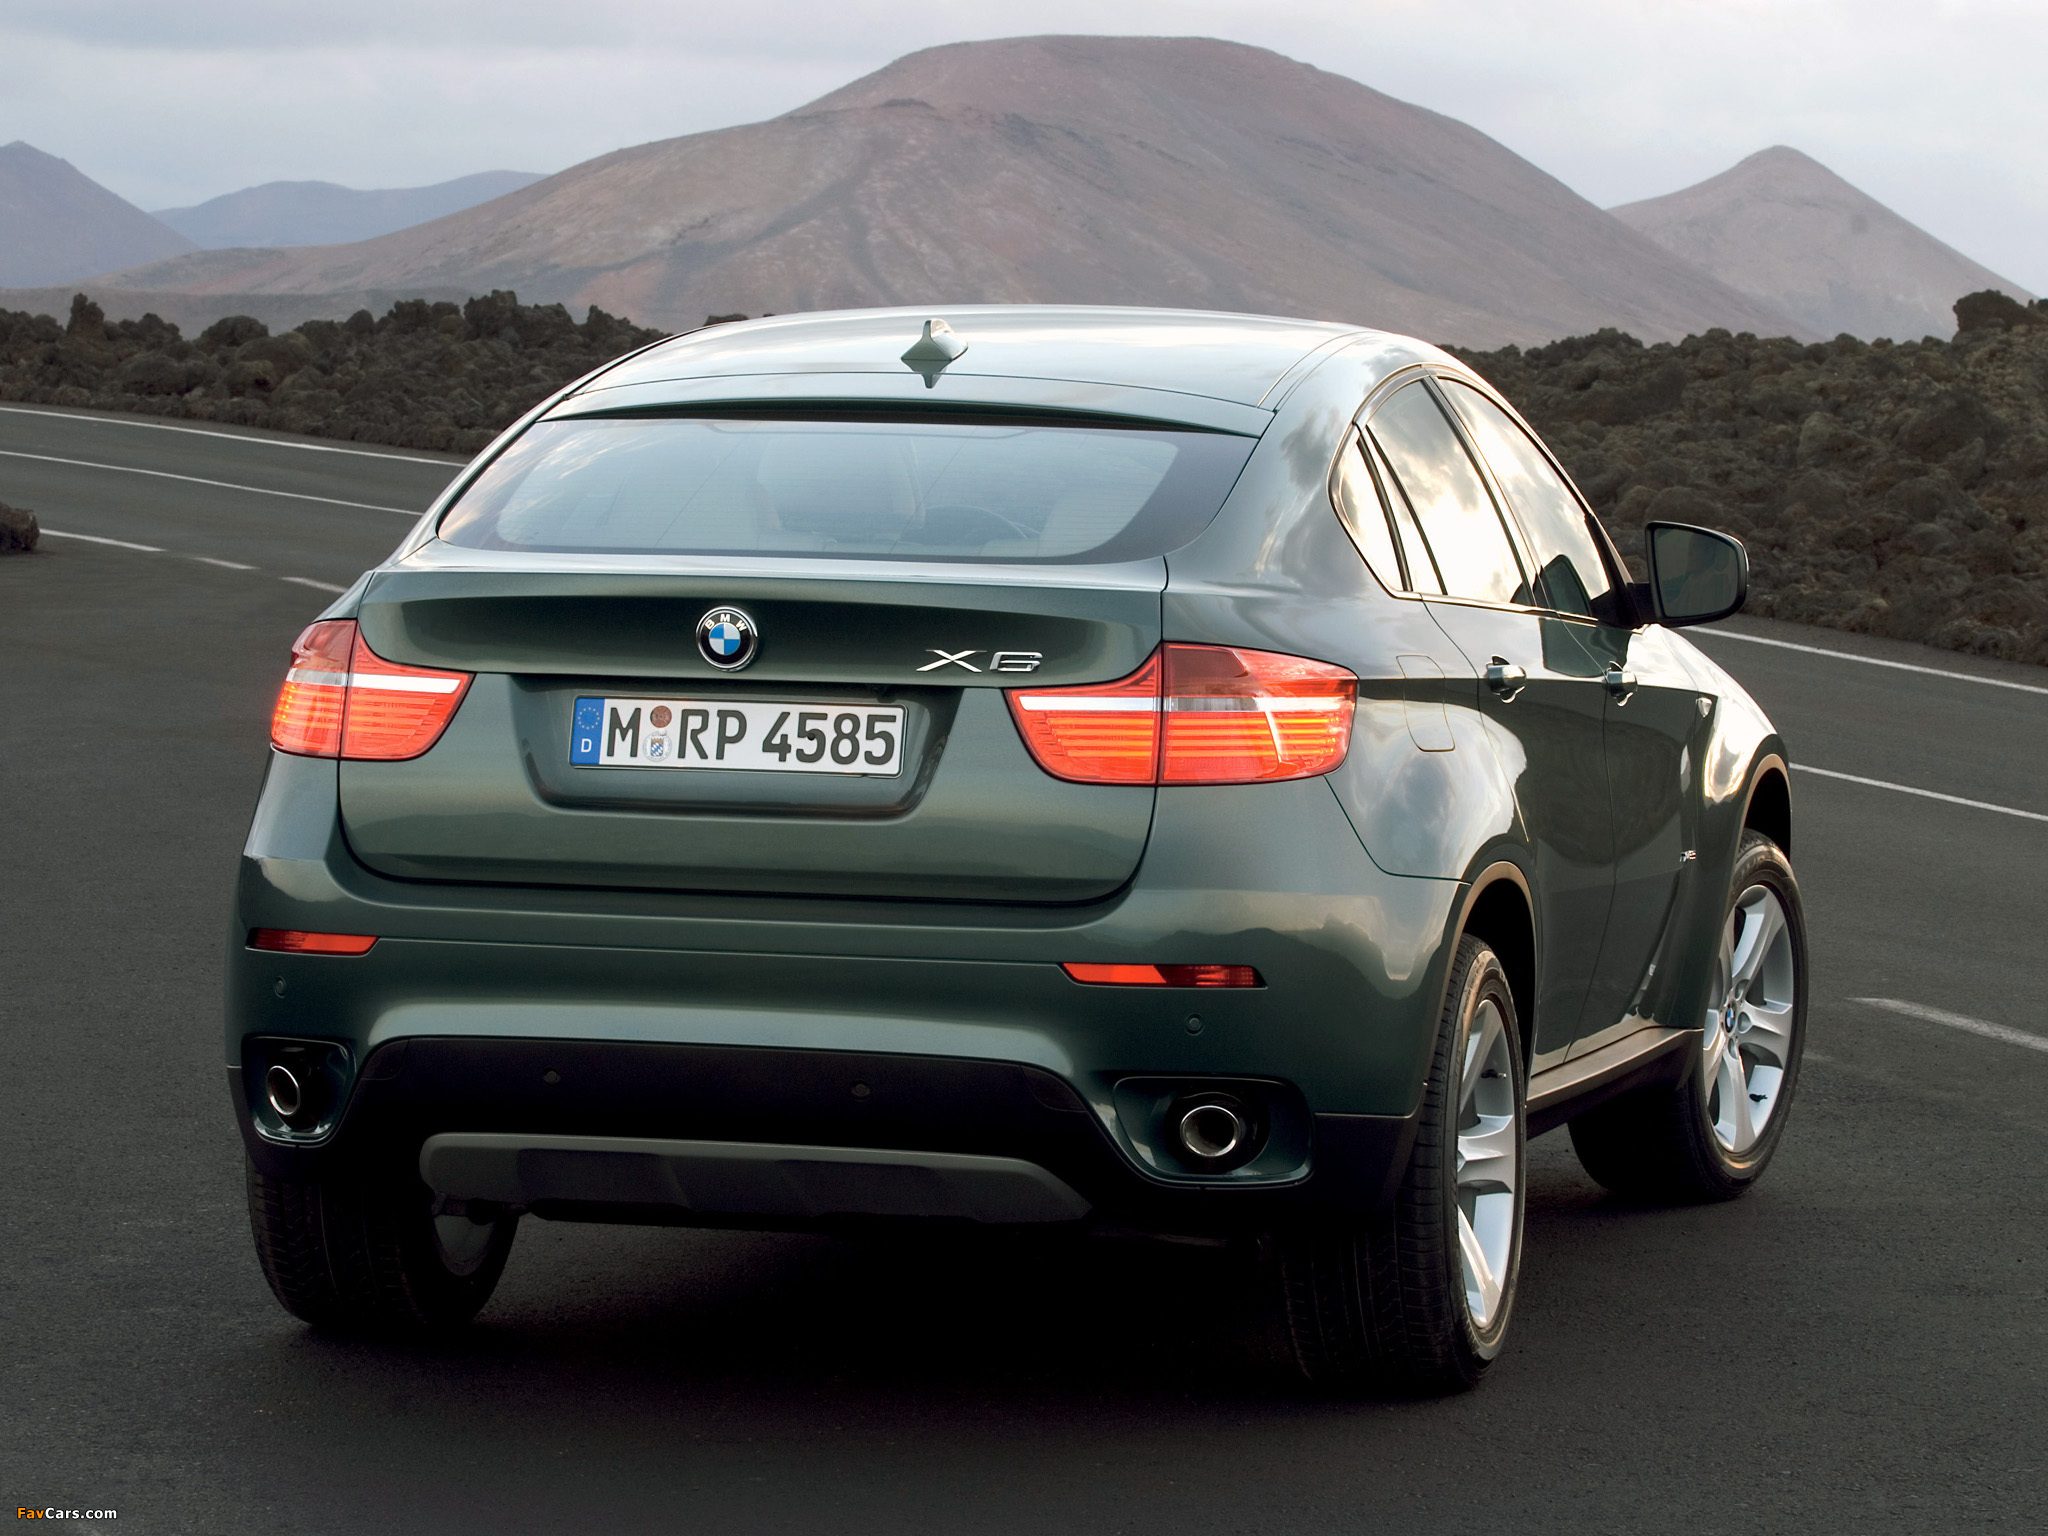 BMW X6 xDrive35d (71) 2008 pictures (2048 x 1536)